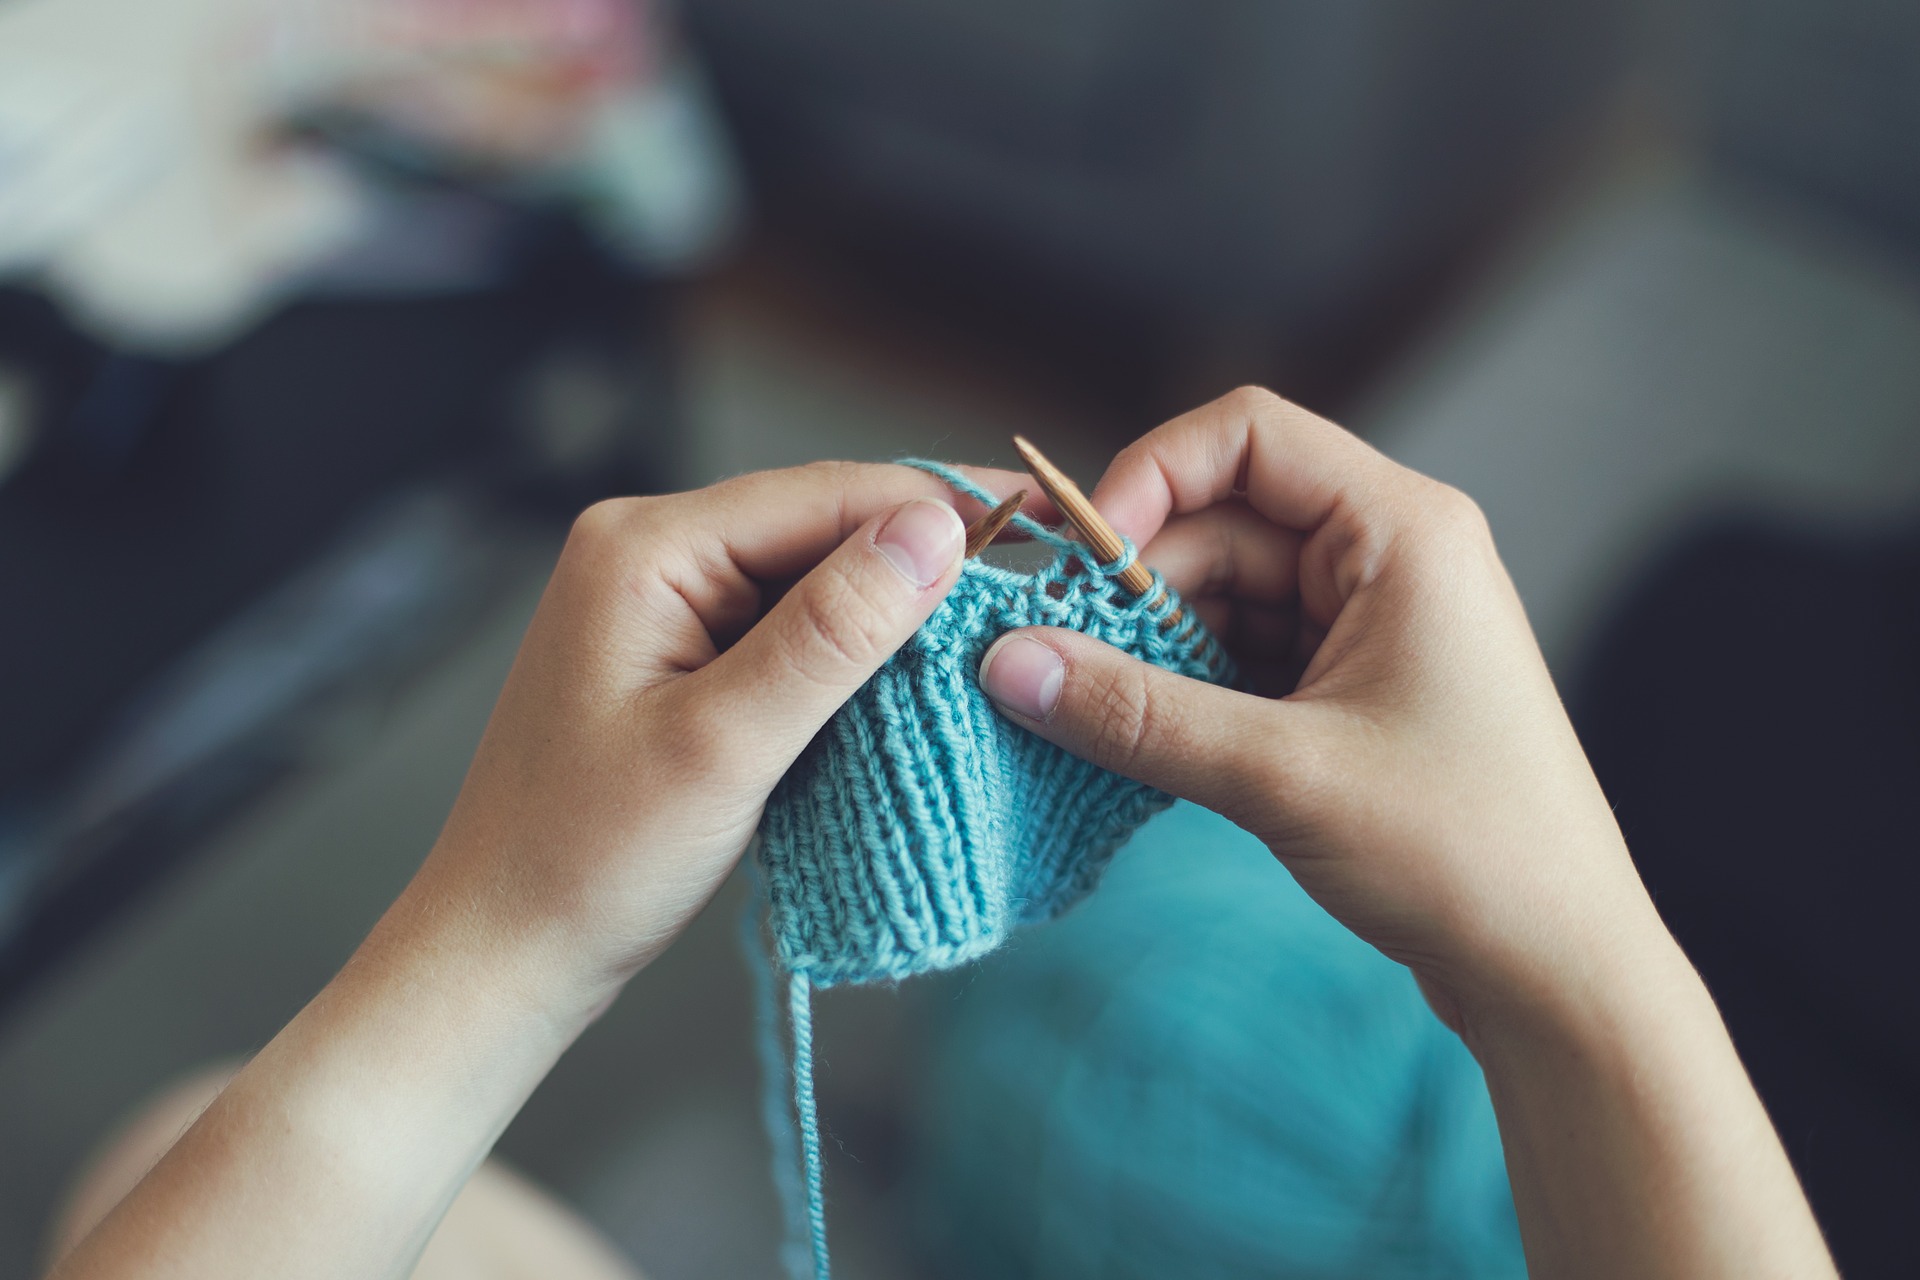 A person knitting a small square using green wool.